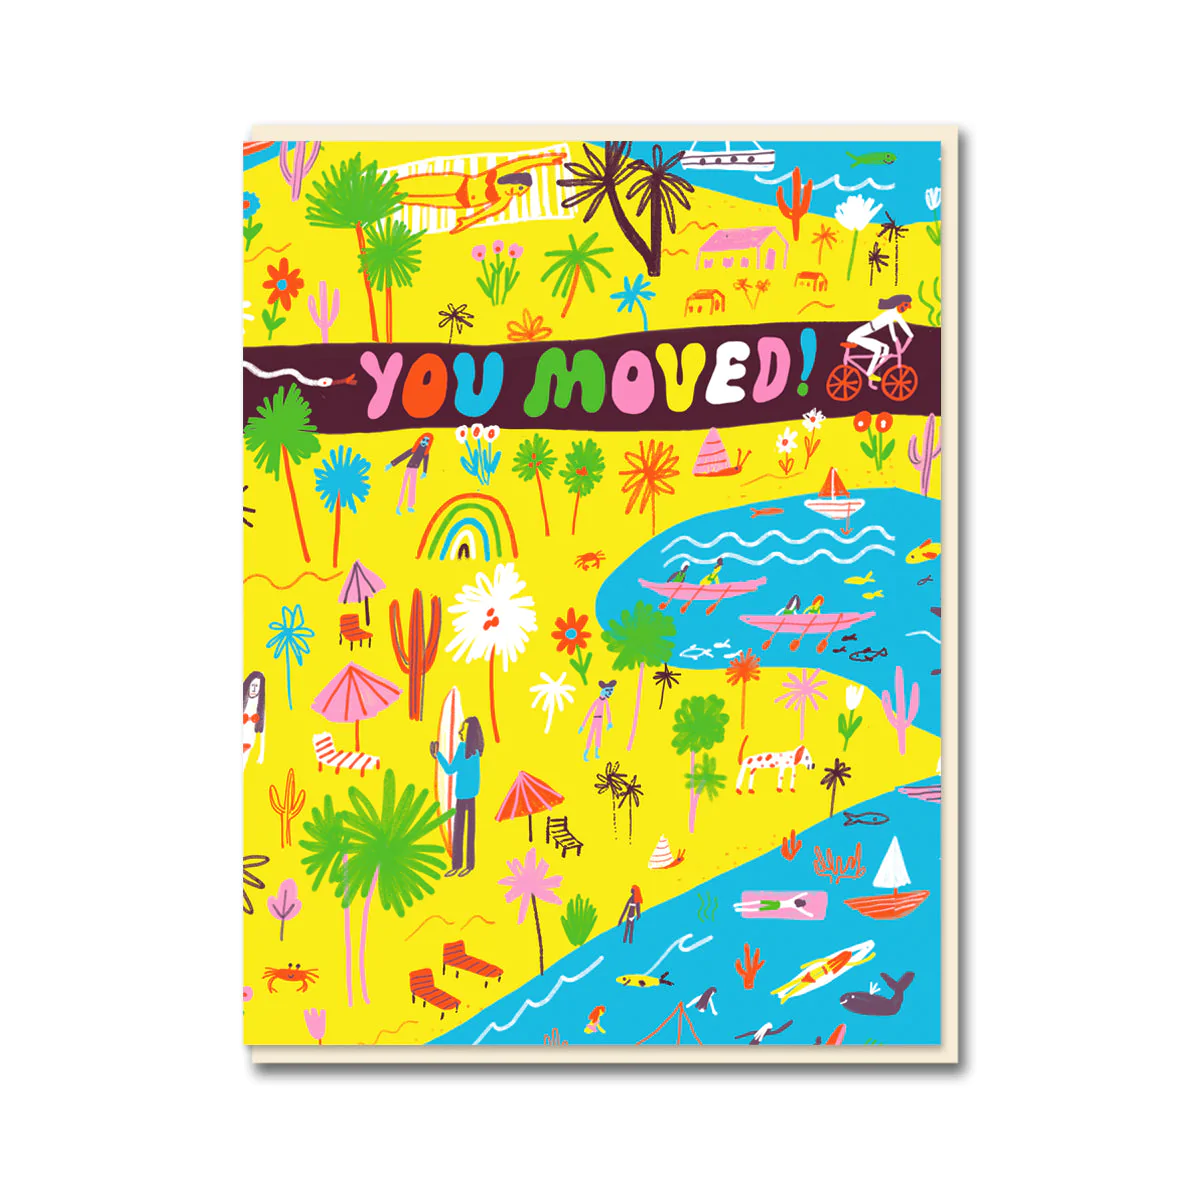 photo of a hand drawn greeting card that reads "you moved!" 